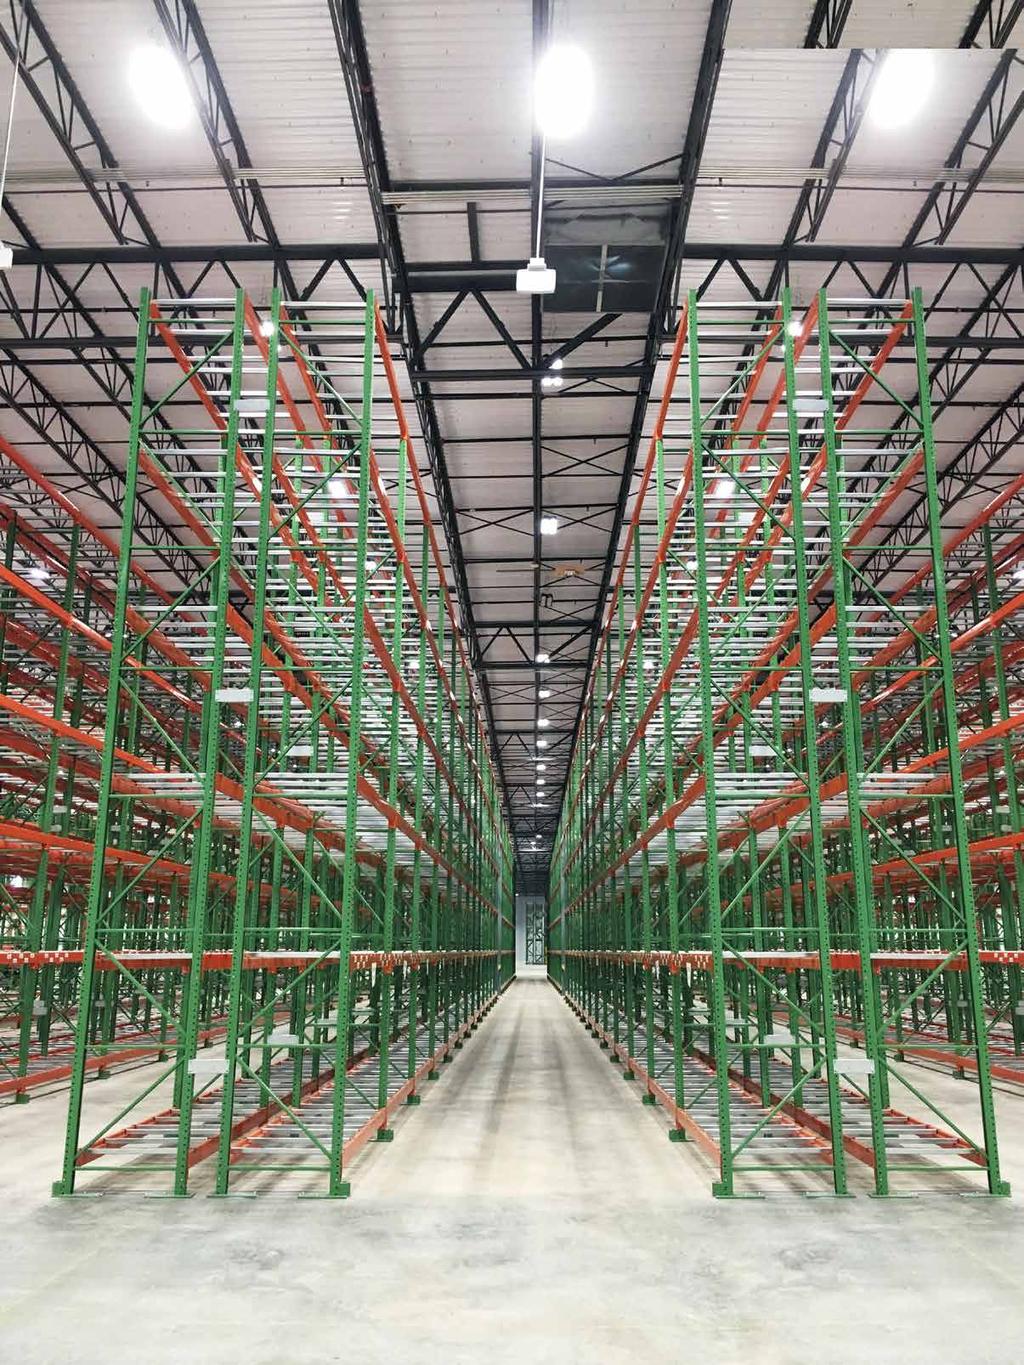 LED Linear light Lighting uniformity for warehouse is essential. Therefore, linear light is always the perfect product for aisle lighting solution.